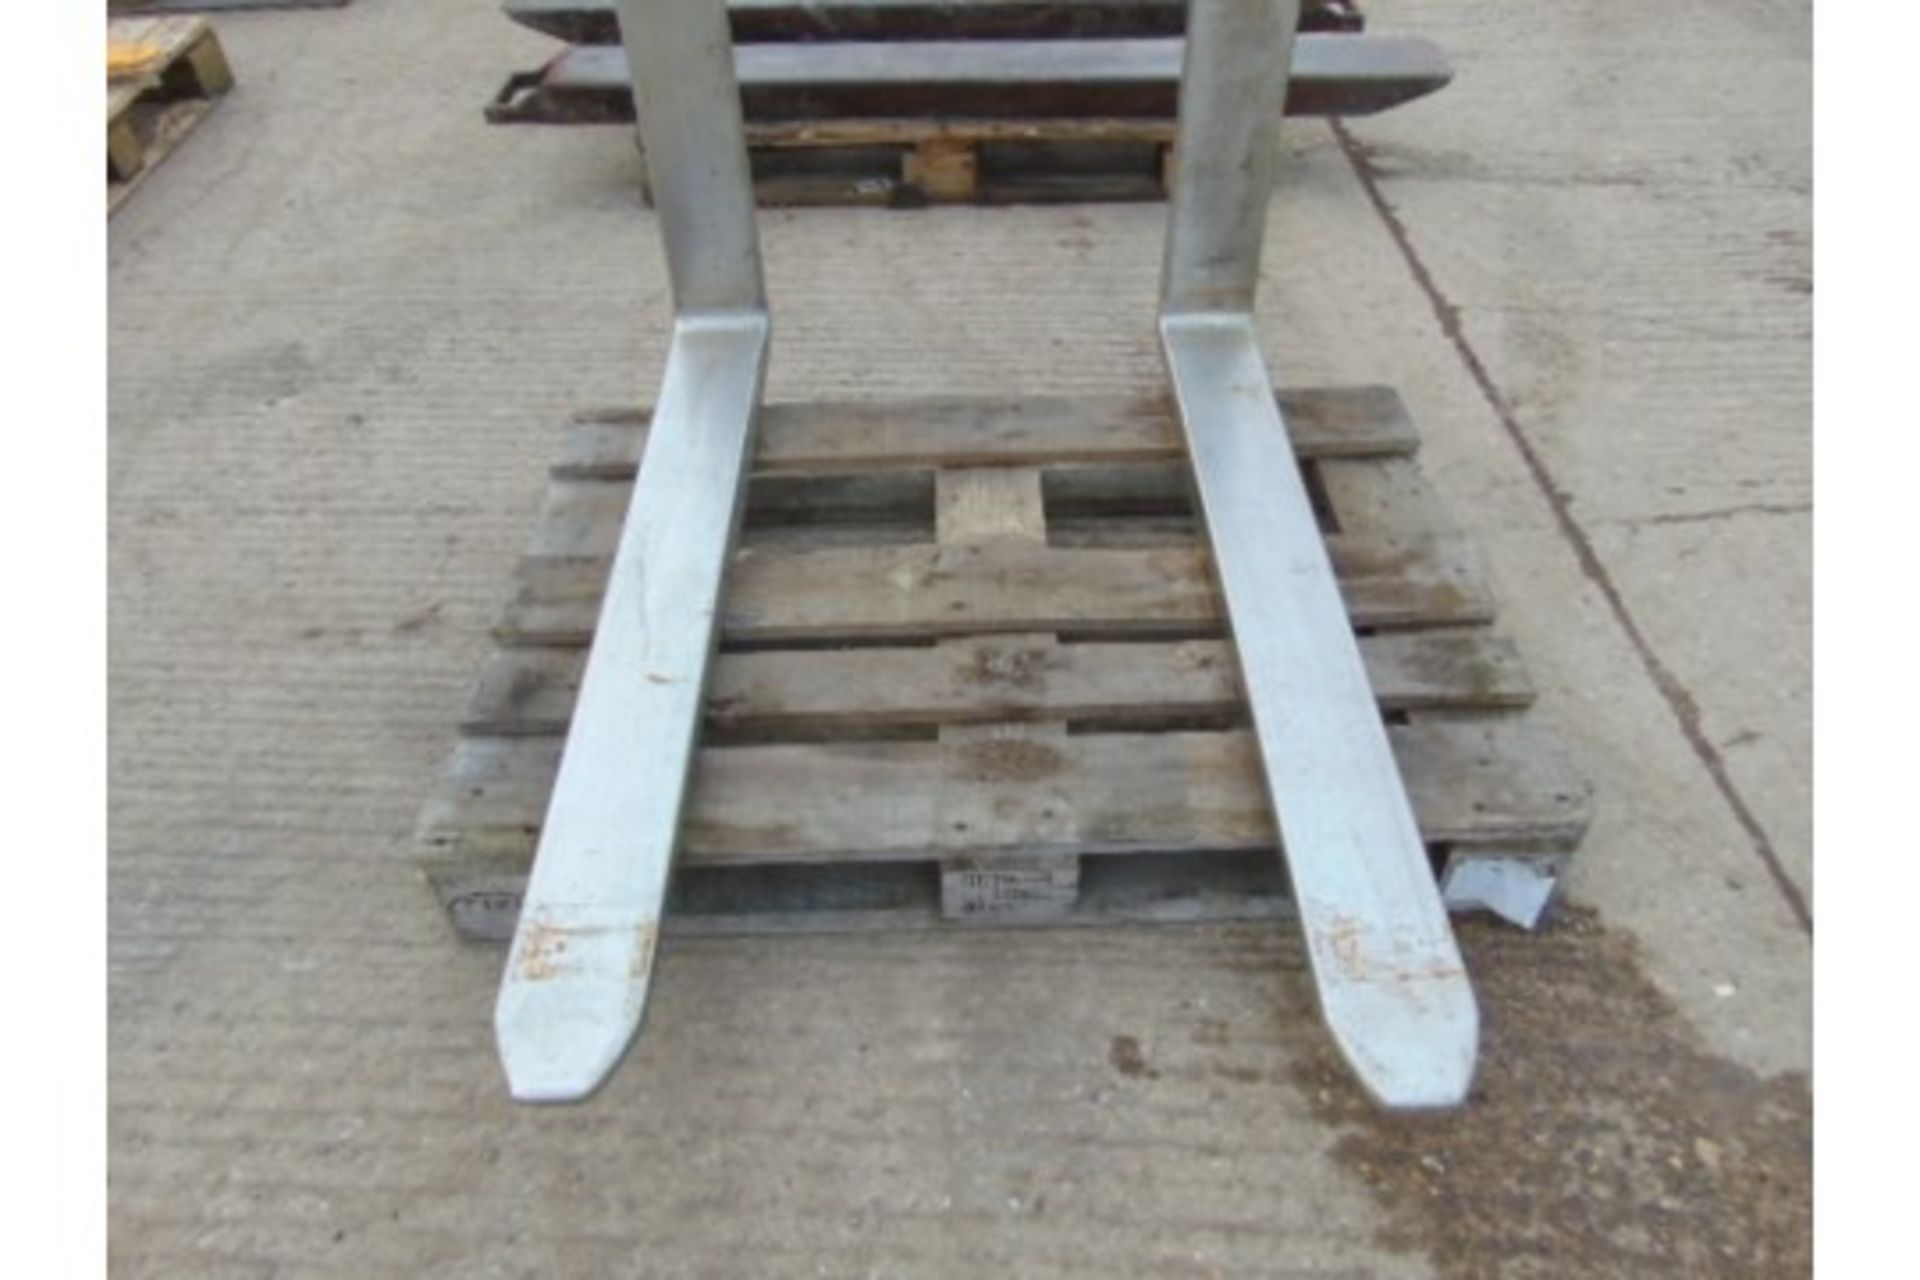 2 x Cascade Stainless Steel Clad Forklift Tines - Image 2 of 5